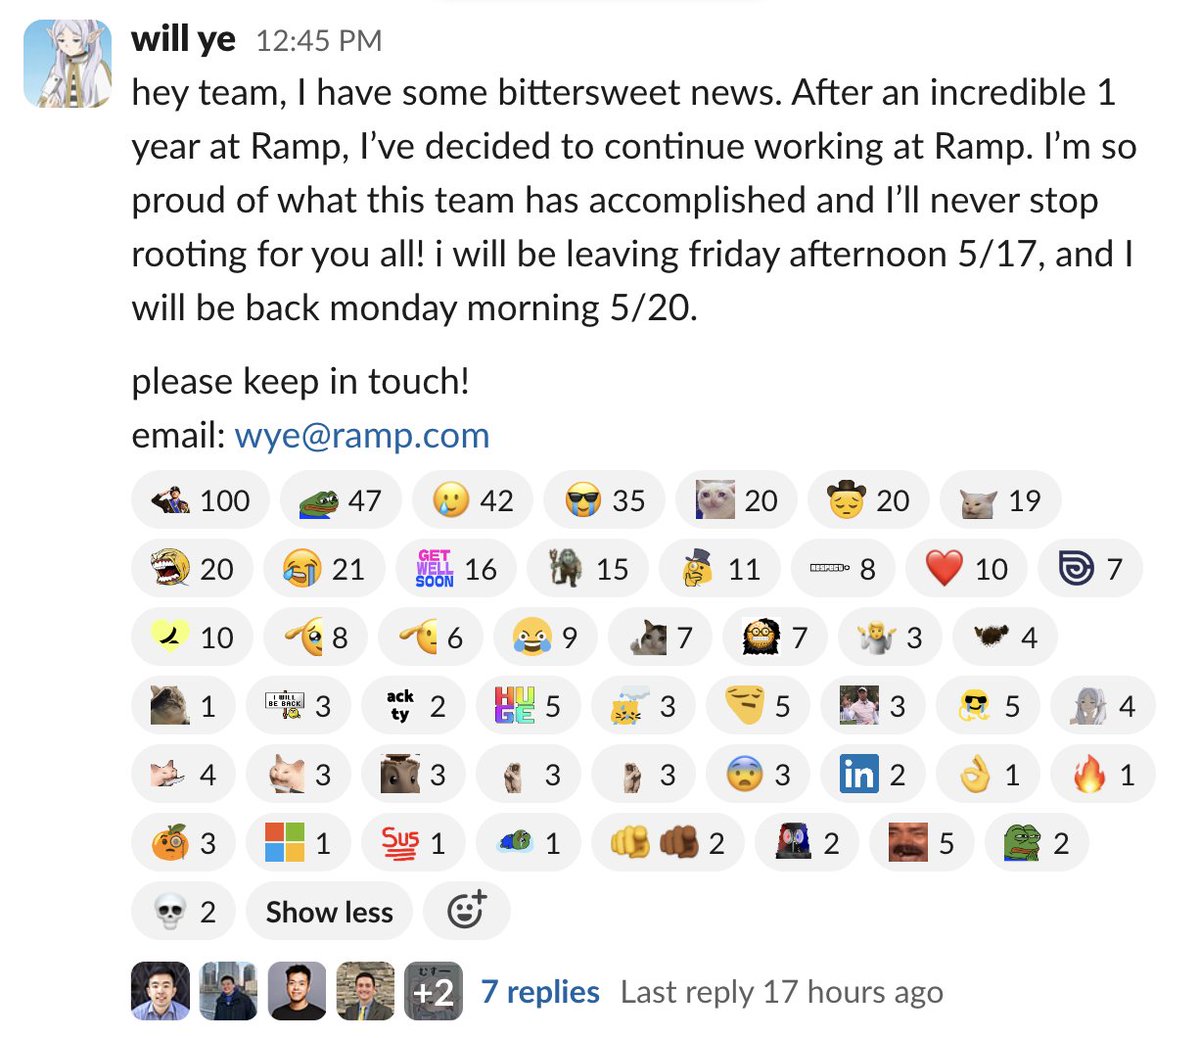 dropped this bad boy in the work slack, felt like i got a standing ovation